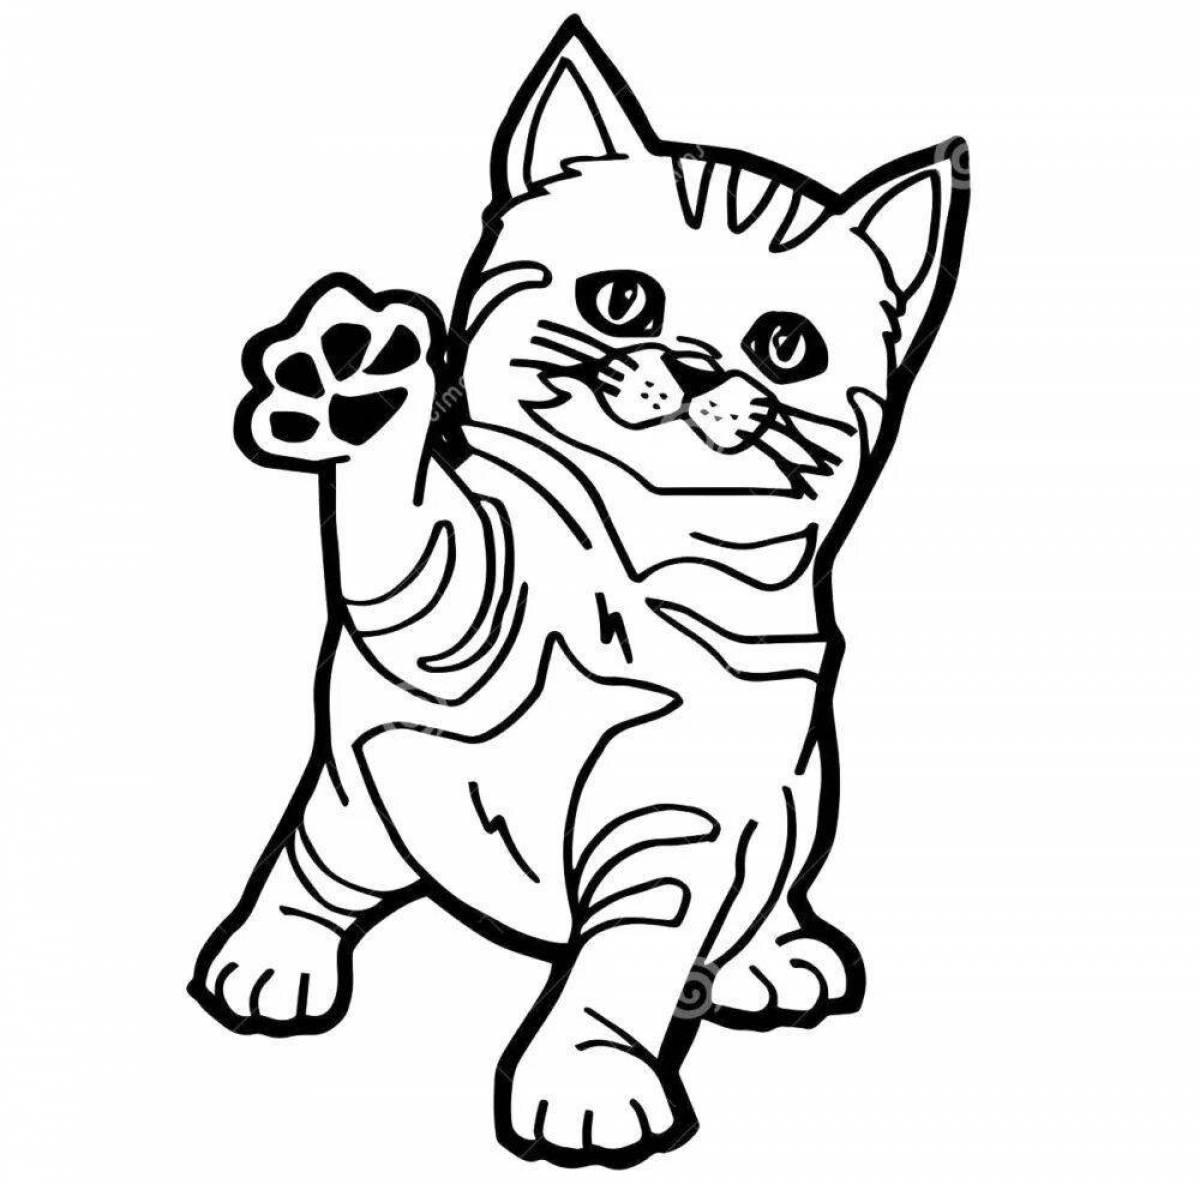 Colorful scottish cat coloring page